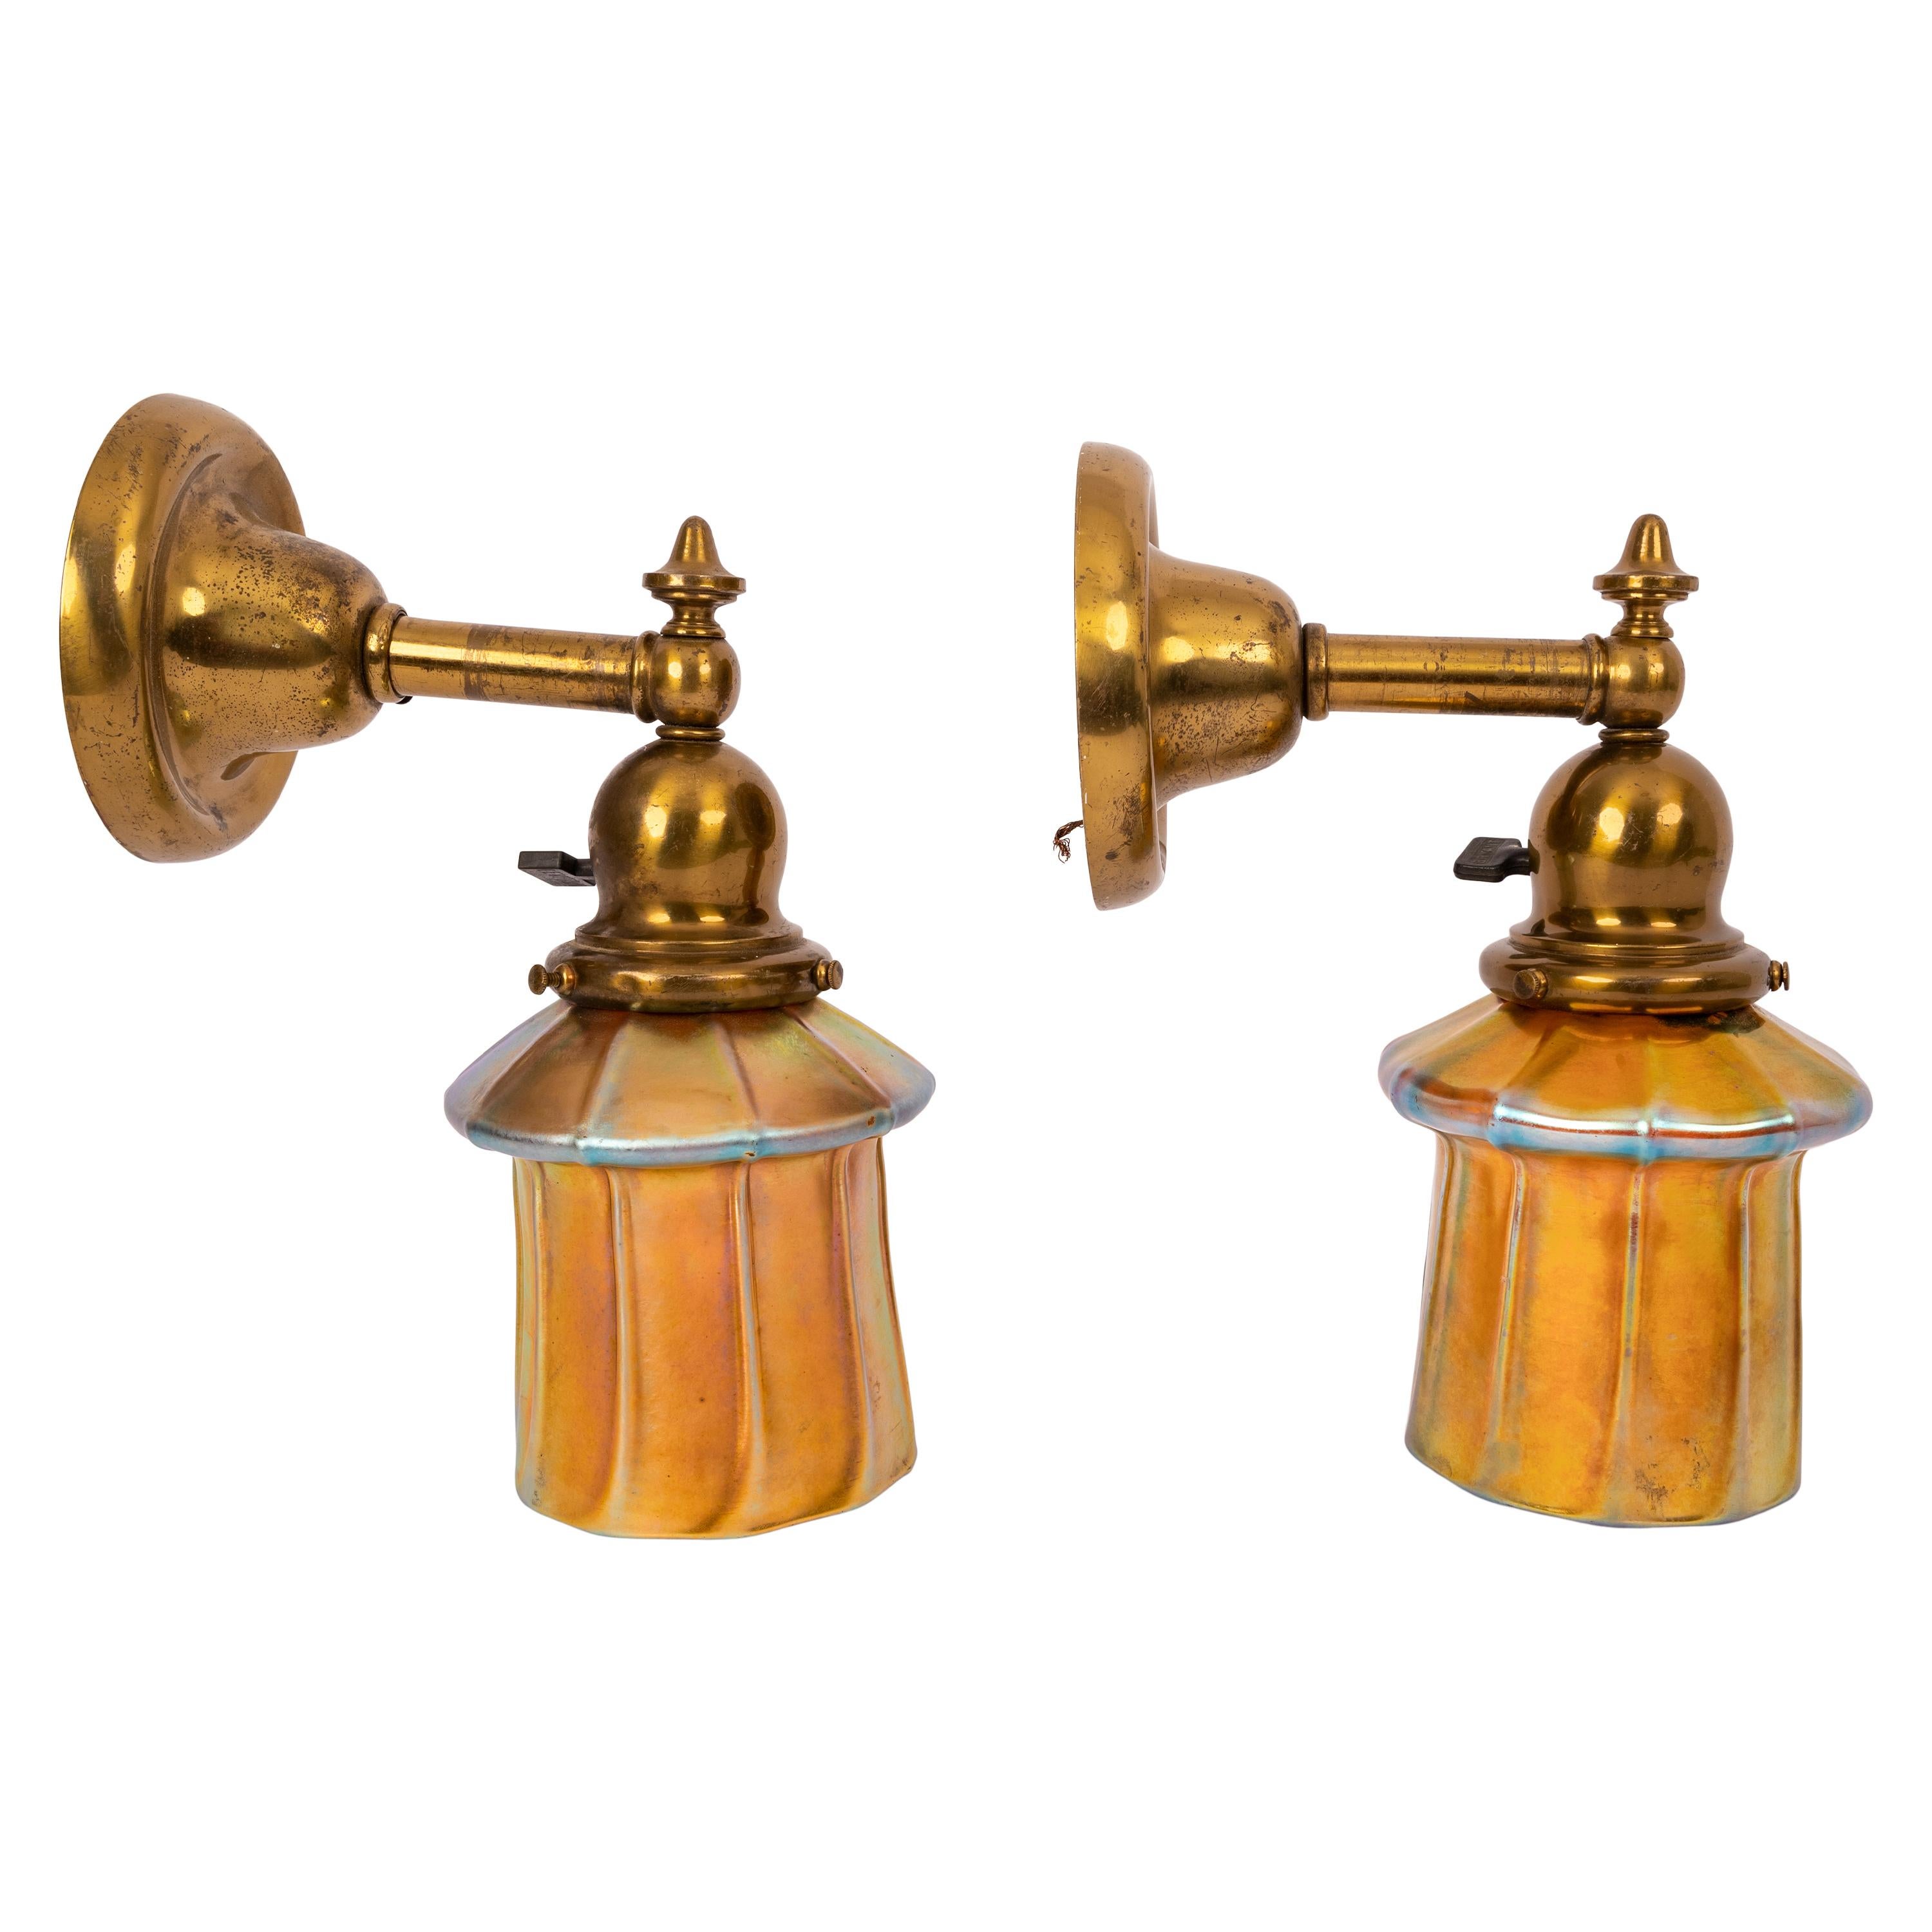 A good pair of antique Arts & Crafts/ Mission Steuben gold Aurene glass shades and brass sconces, circa 1910.
The sconces having the original brass wall mounts with circular backplates, the sconces having circular posts that connect to the domed